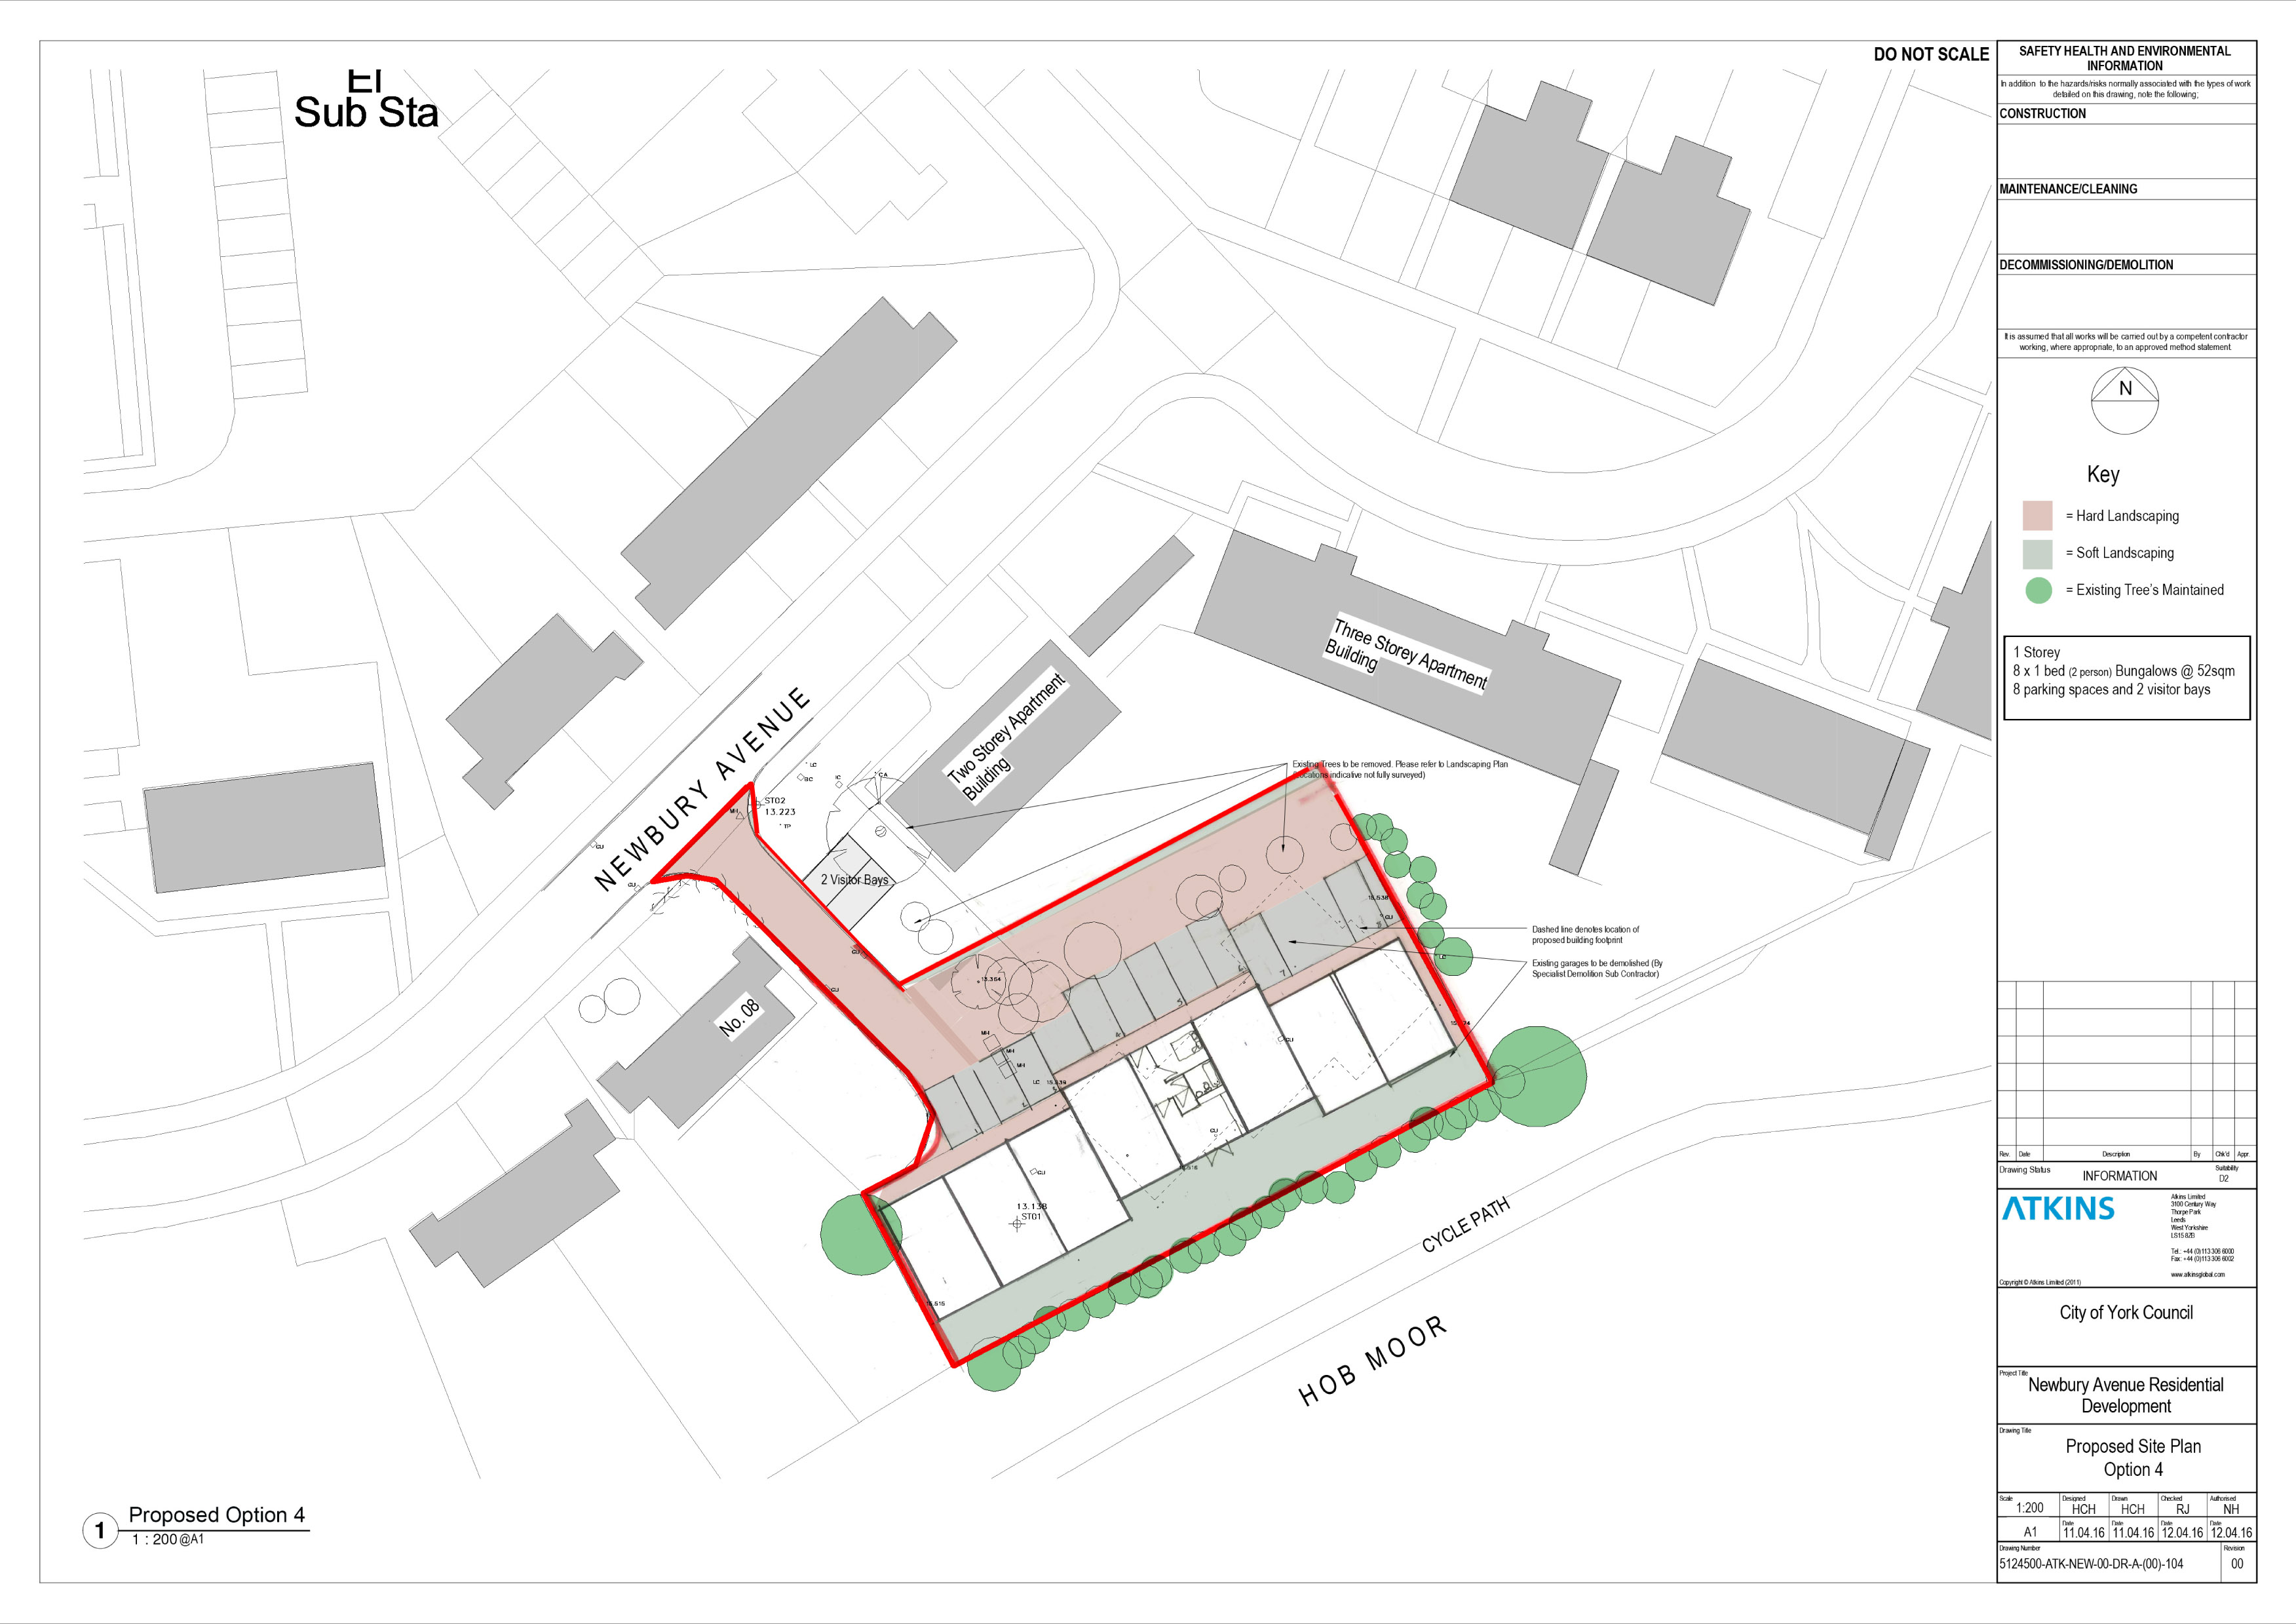 The Council approved on Thursday plans to erect 8 bungalows on the Newbury Avenue garage site. Residents have pledged to oppose the proposal when it reaches the planning committee if alterantive car parking spaces are not provided via a Section 106 agreement